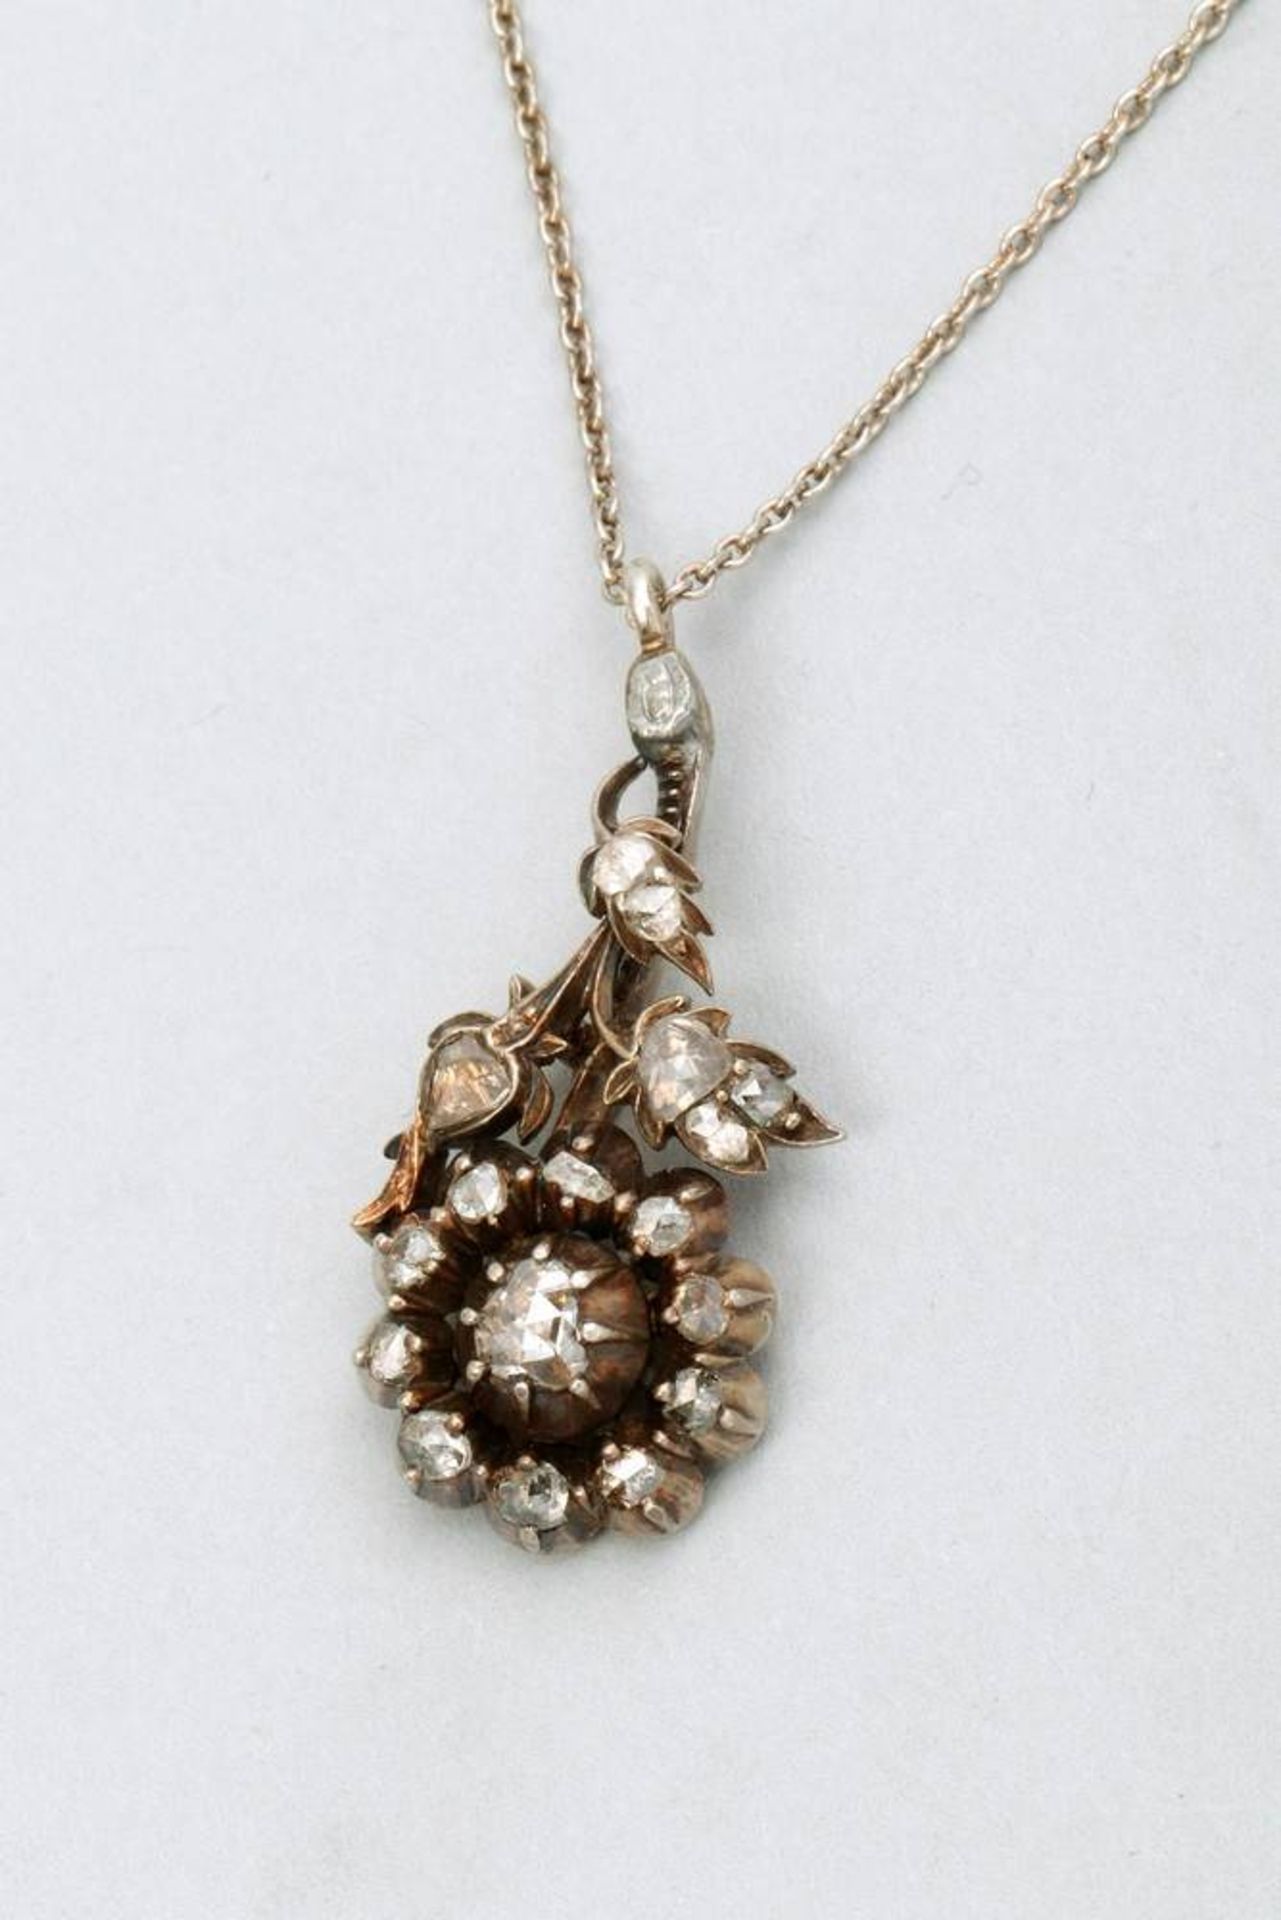 Pendant on chain333 gold, ca. 1880, set with 16 rose diamonds, old cut, tinted, si - p, 5,2g in